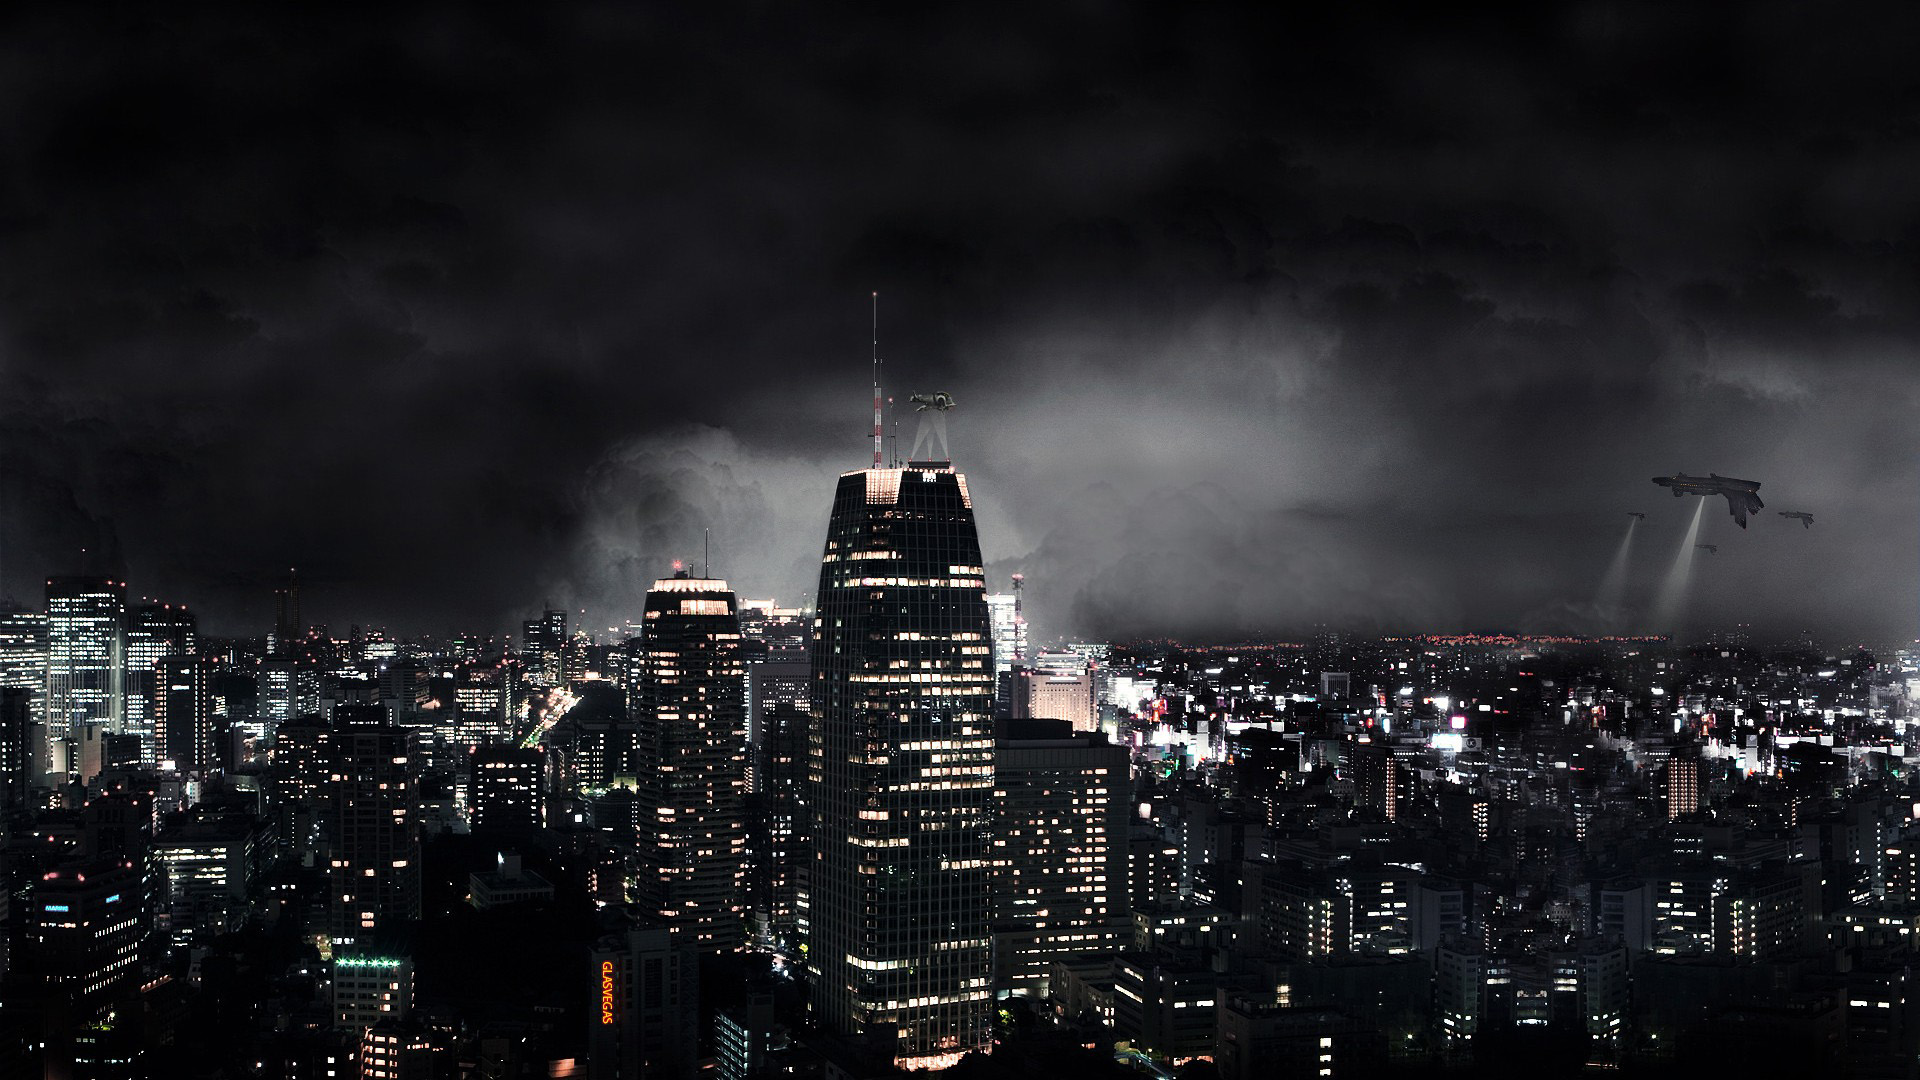 Dark Abstract City HD Wallpaper Background Image